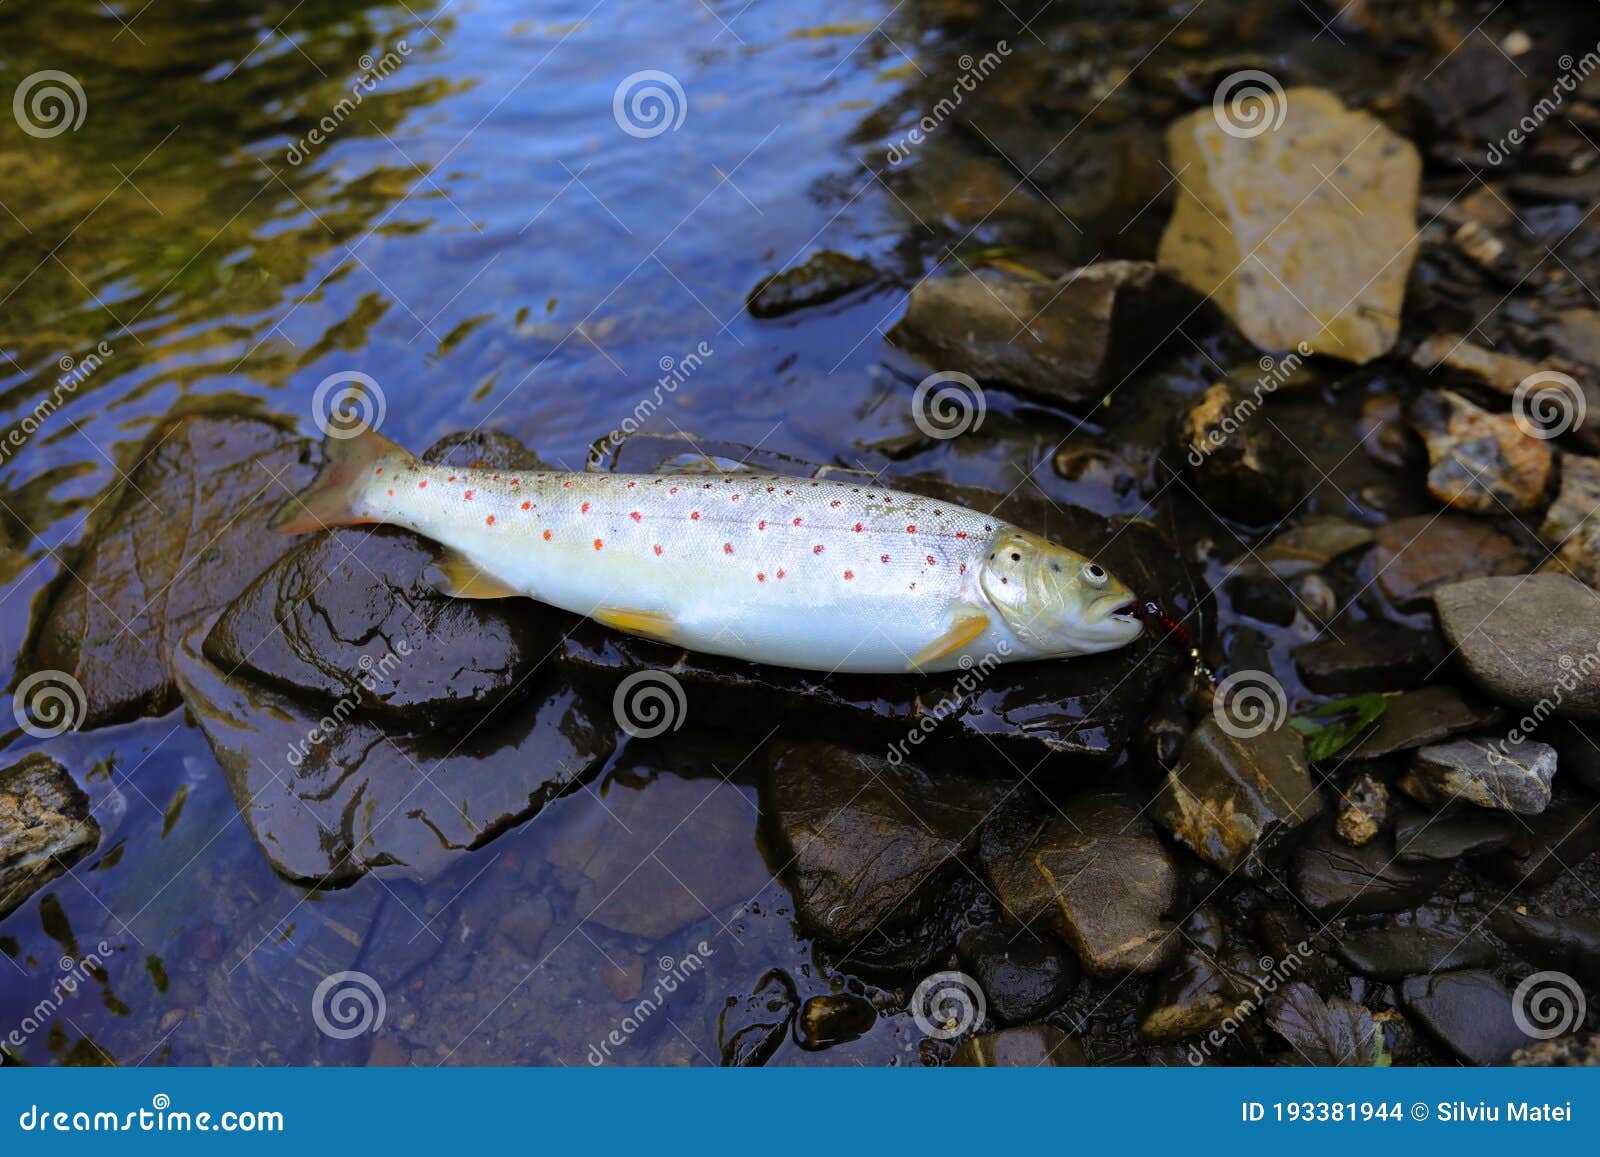 thirty centimetres beautiful big indigenous trout on a wild mountains river.